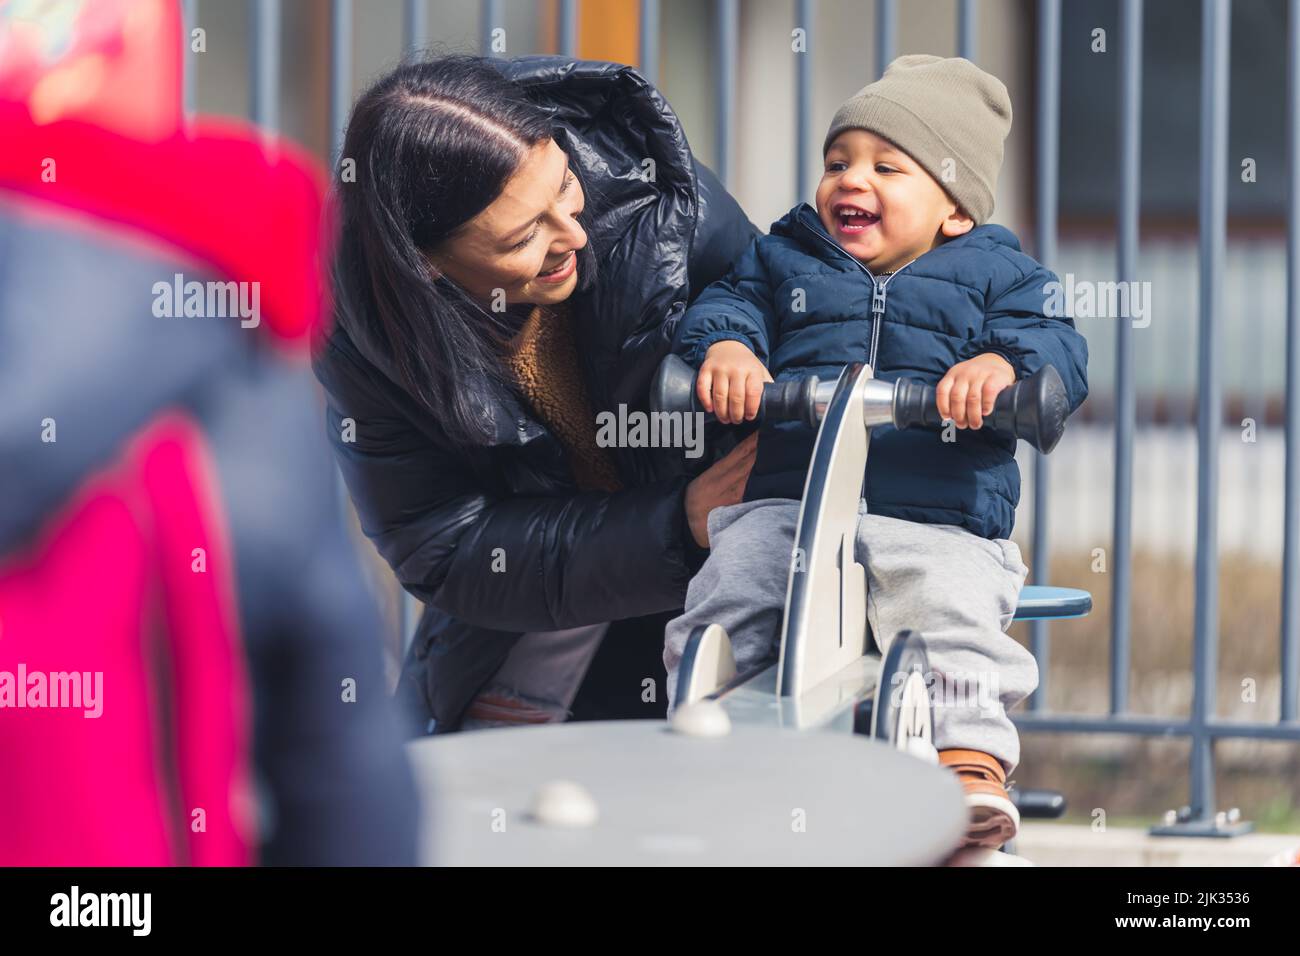 A Wonderful full of happiness dark-skinned five years of age boy on a see saw spending lovely time together with his attractive caucasian mother on a playground for kids. High quality photo Stock Photo